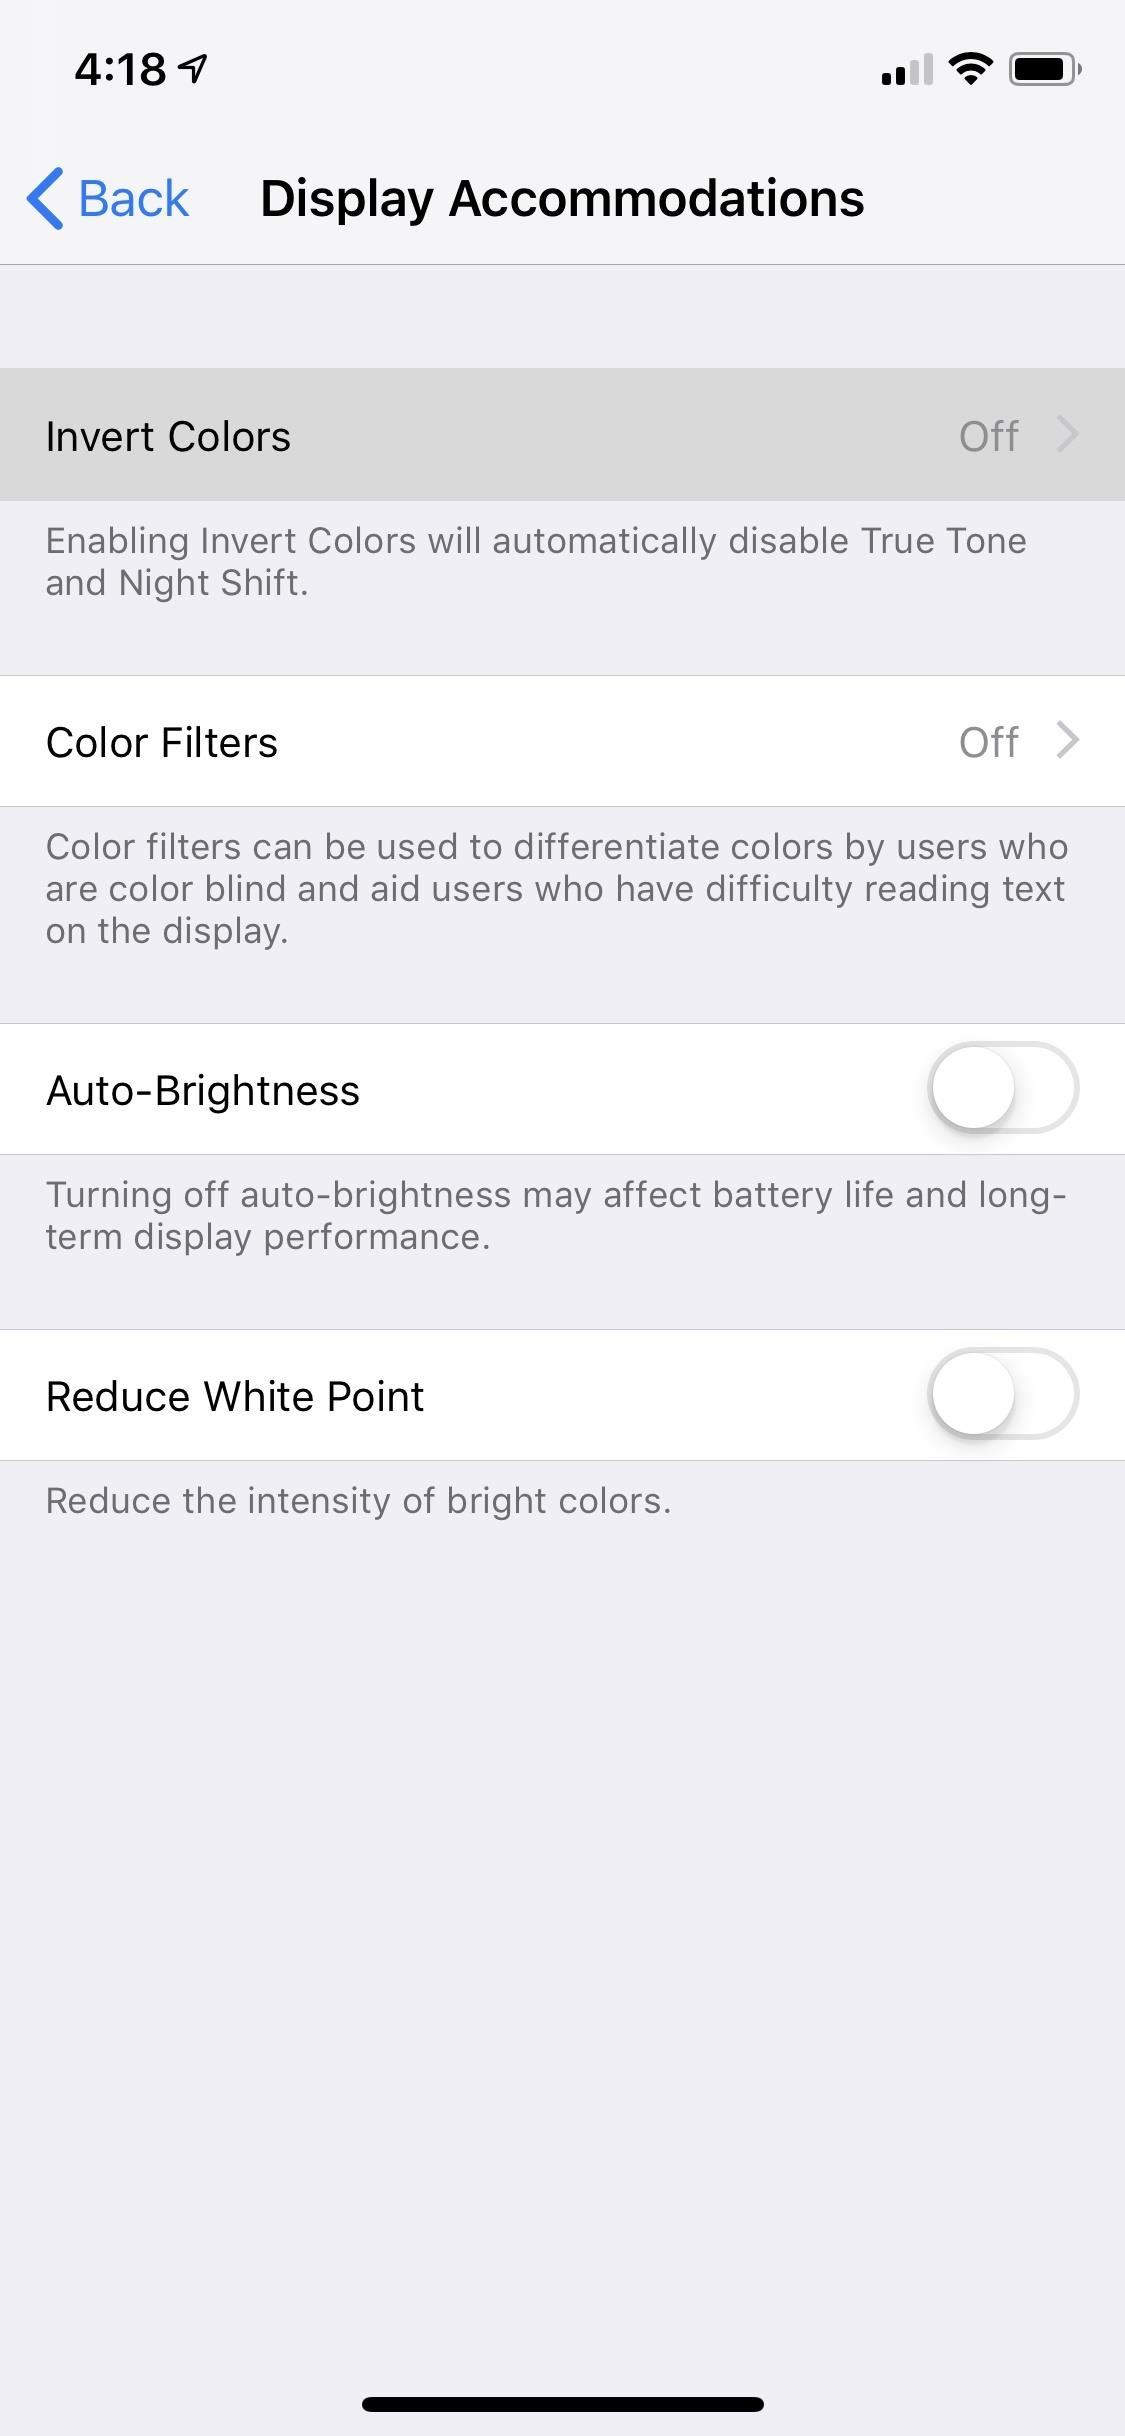 How to Unlock Apple's 'Dark Mode' in iOS 11, 12 & 13 for iPhone